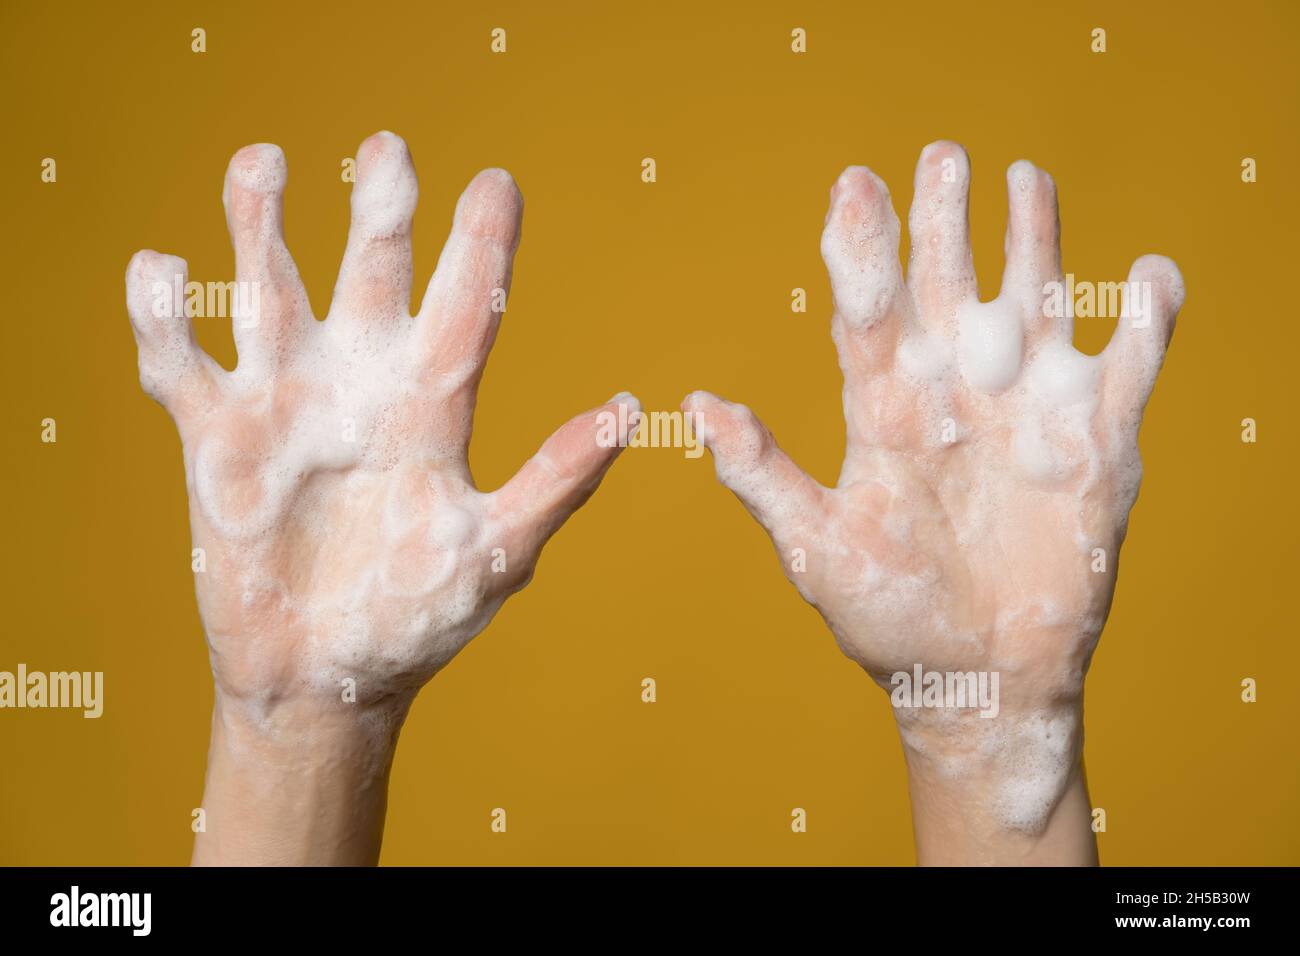 Hands covered with soapy foam. Isolated, on a yellow background. Concept for an effective way to prevent the spread of infections.  Stock Photo